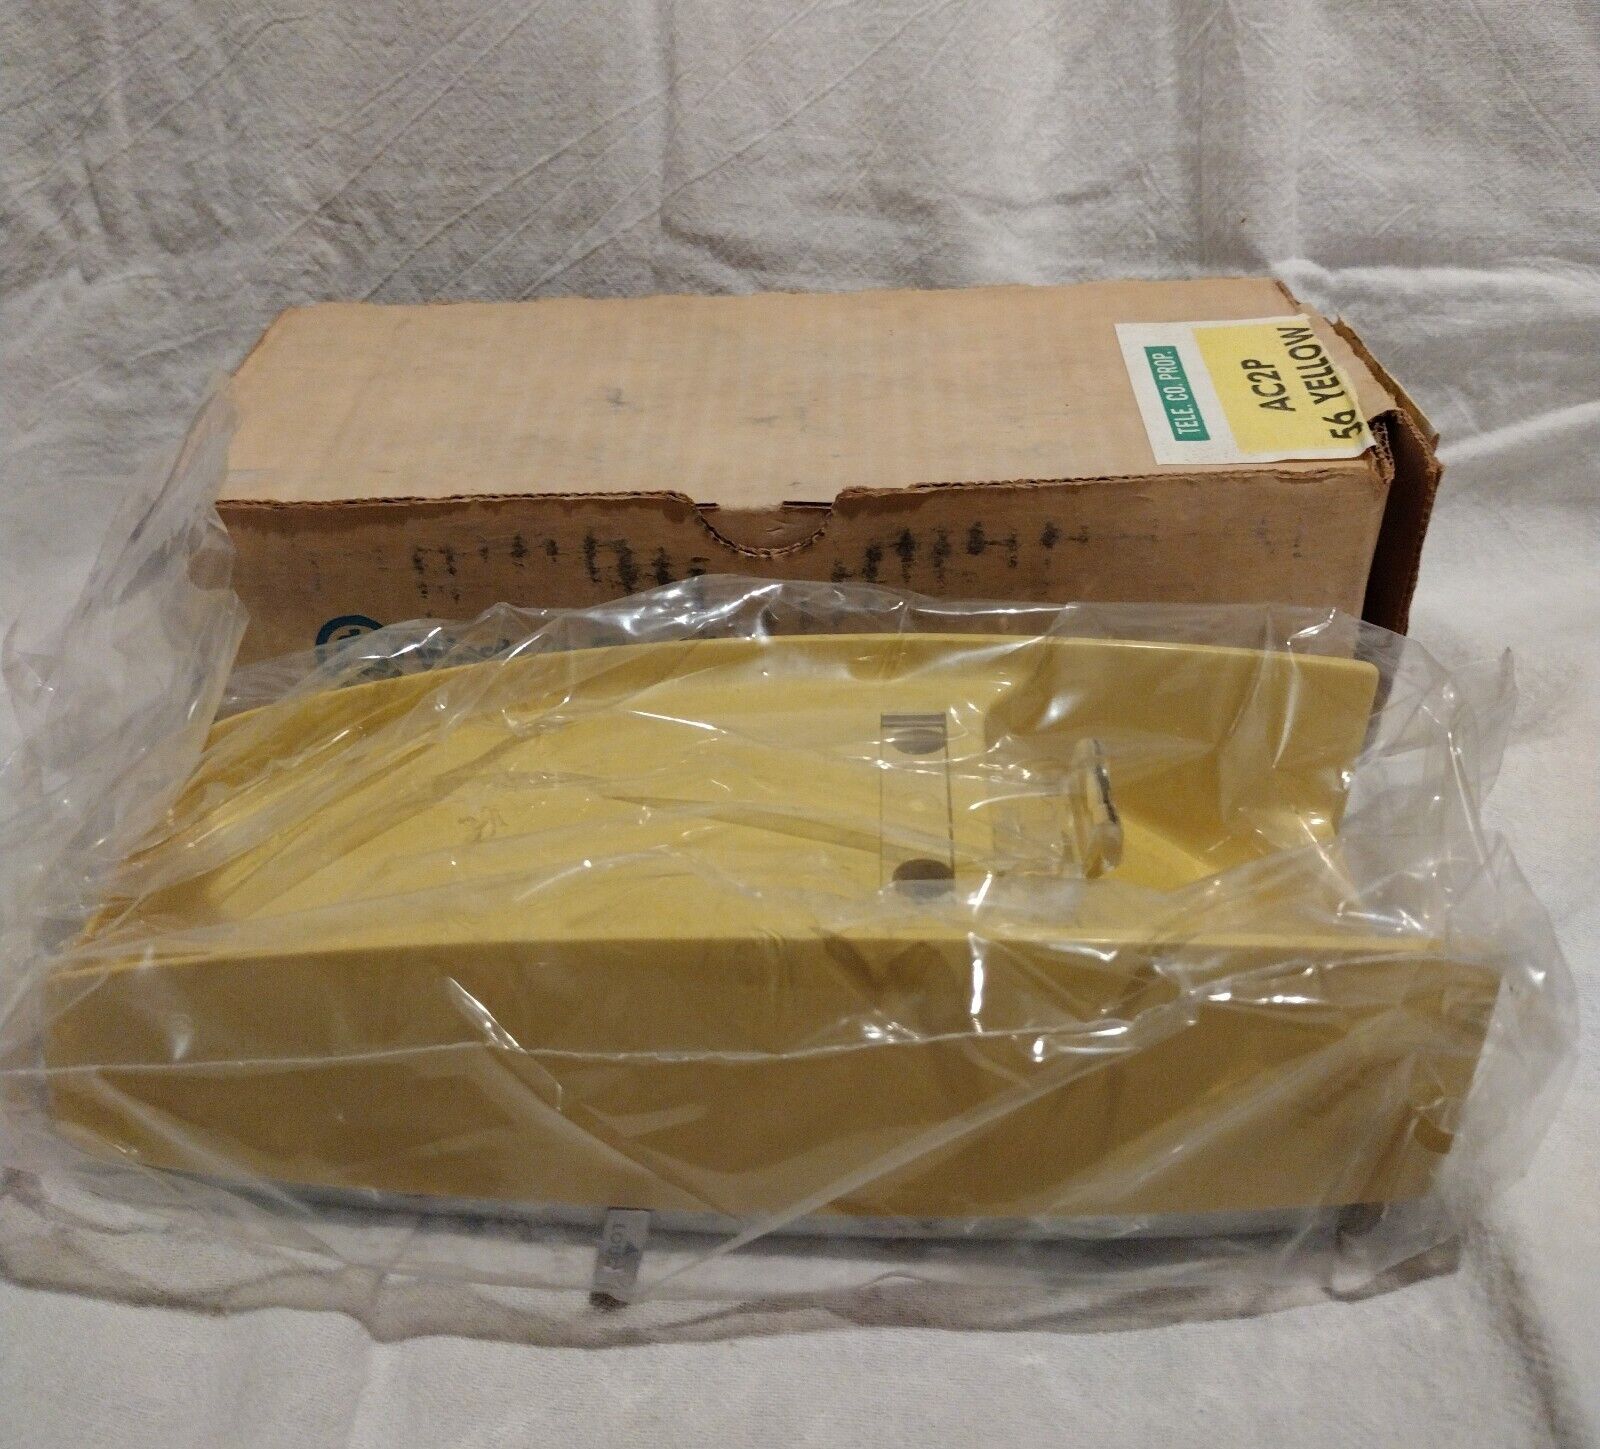 NOS - Western Electric / Bell System Telephone Base AC2P  Yellow / Original Box